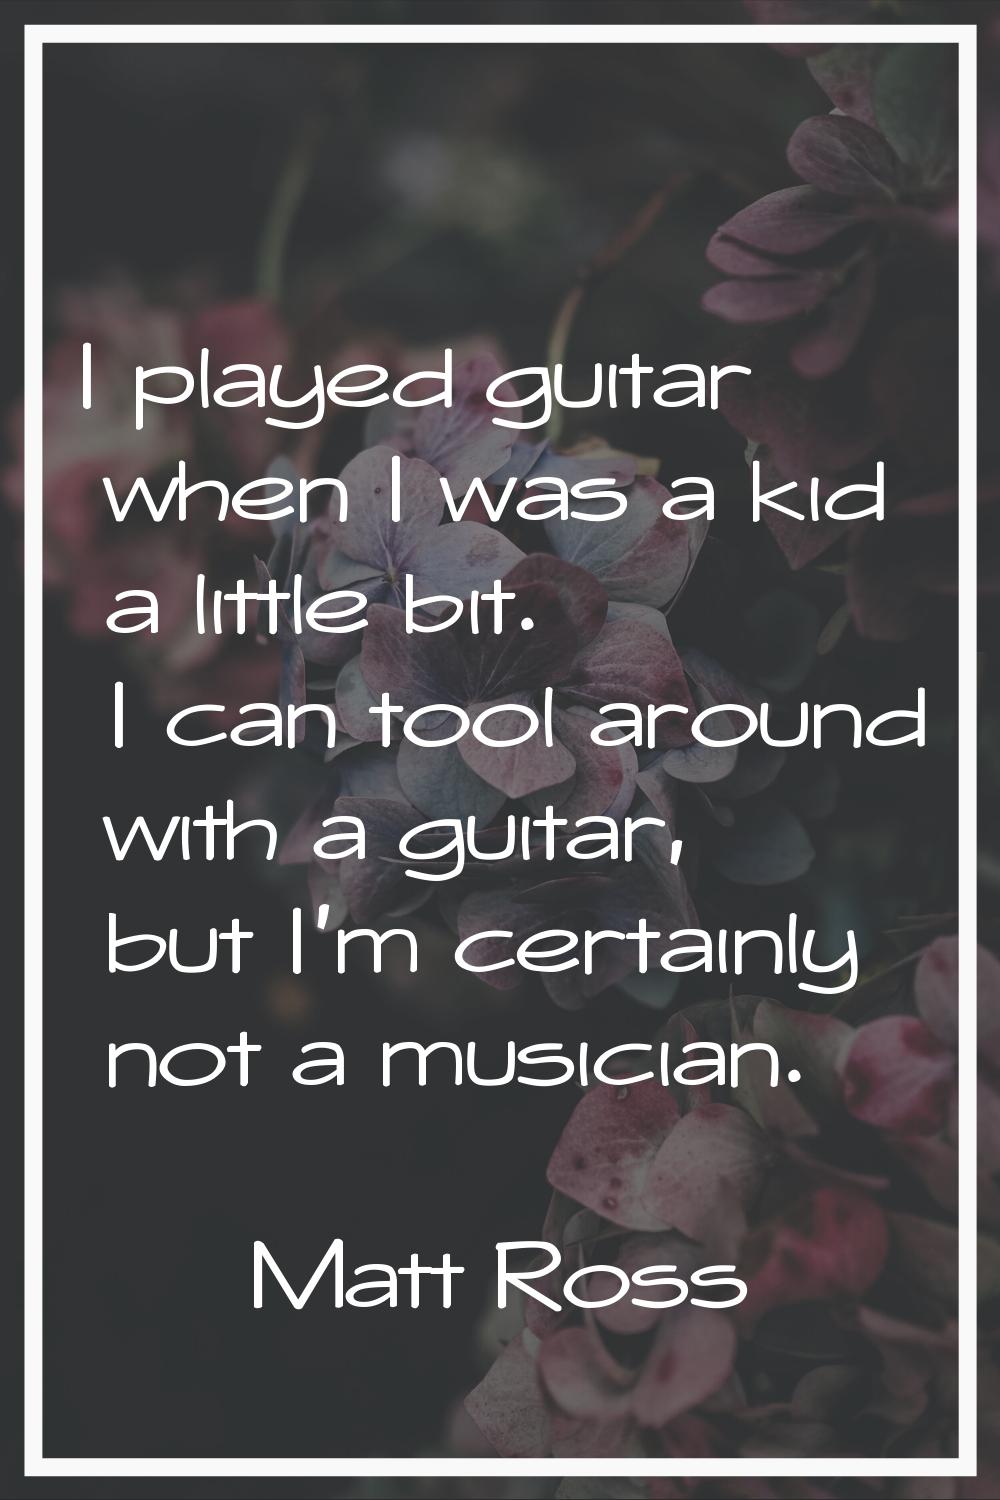 I played guitar when I was a kid a little bit. I can tool around with a guitar, but I'm certainly n